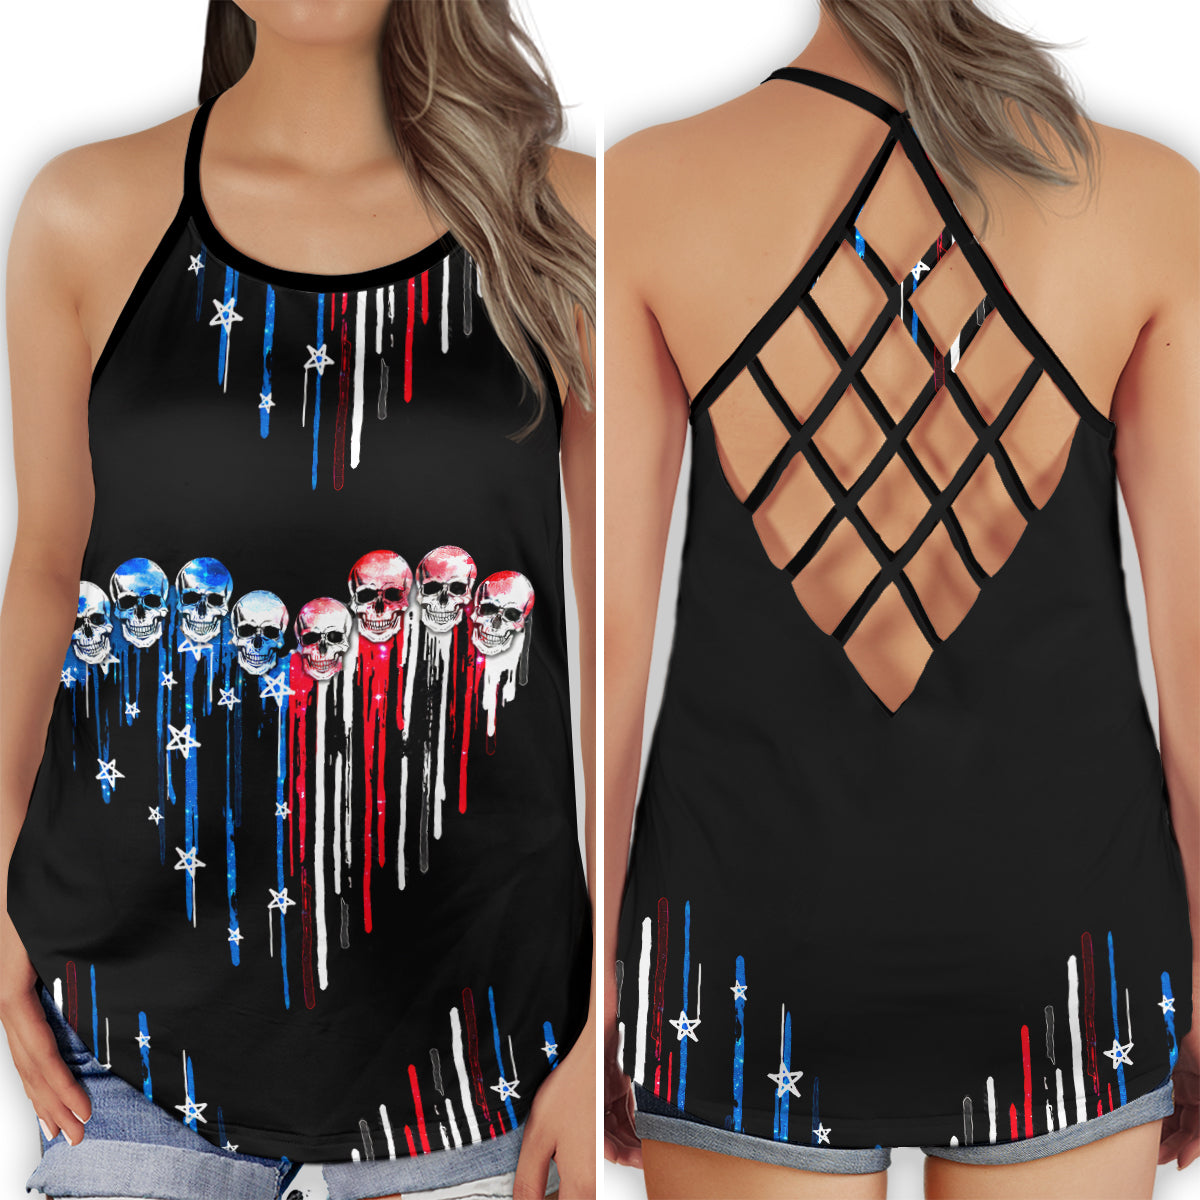 S America Independence Day Happiness Amazing - Cross Open Back Tank Top - Owls Matrix LTD